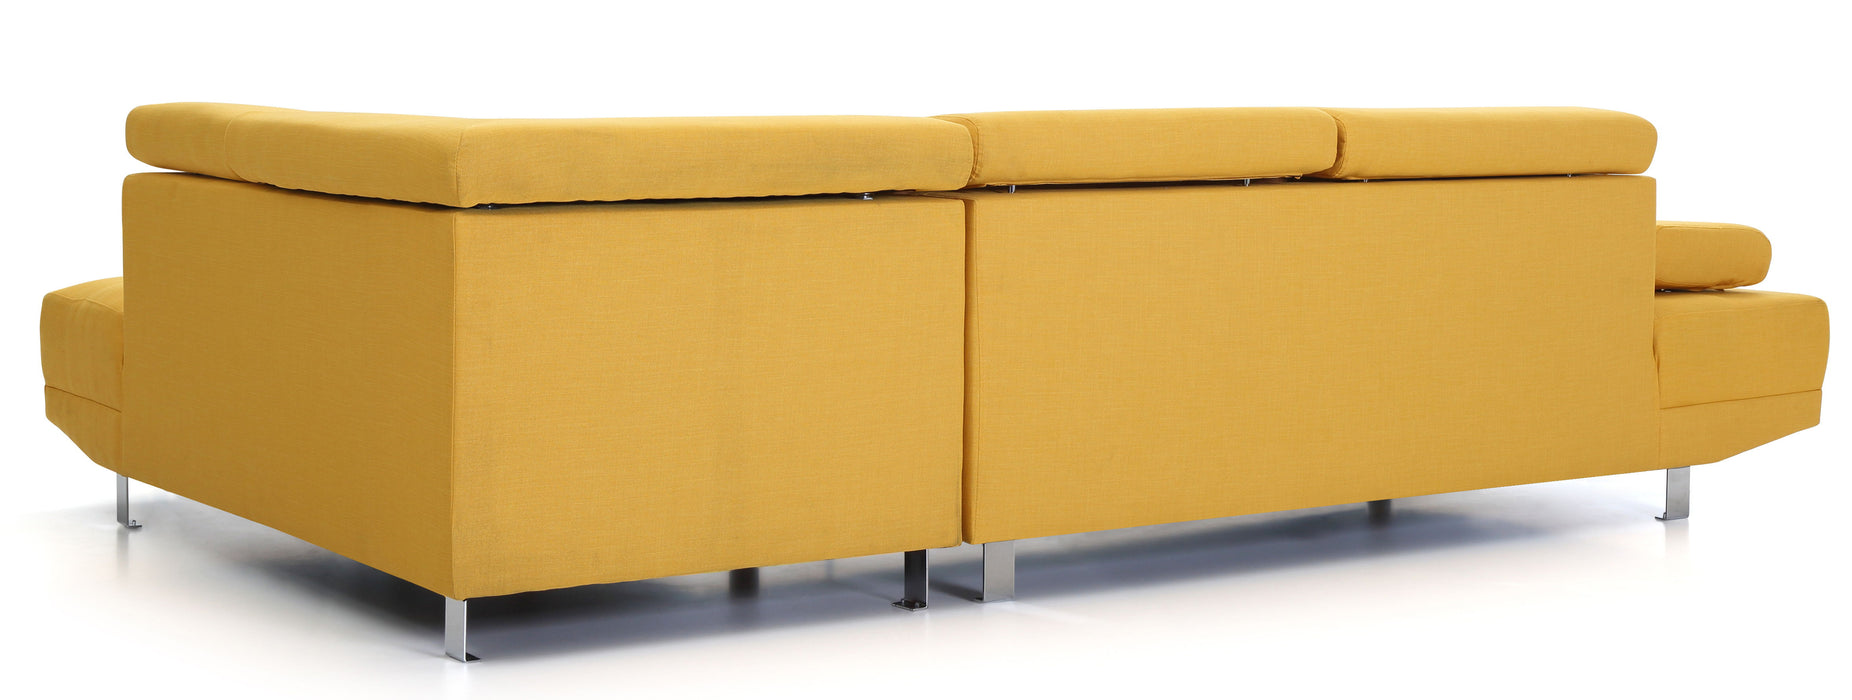 Glory Furniture Riveredge Sectional (2 Boxes), Yellow